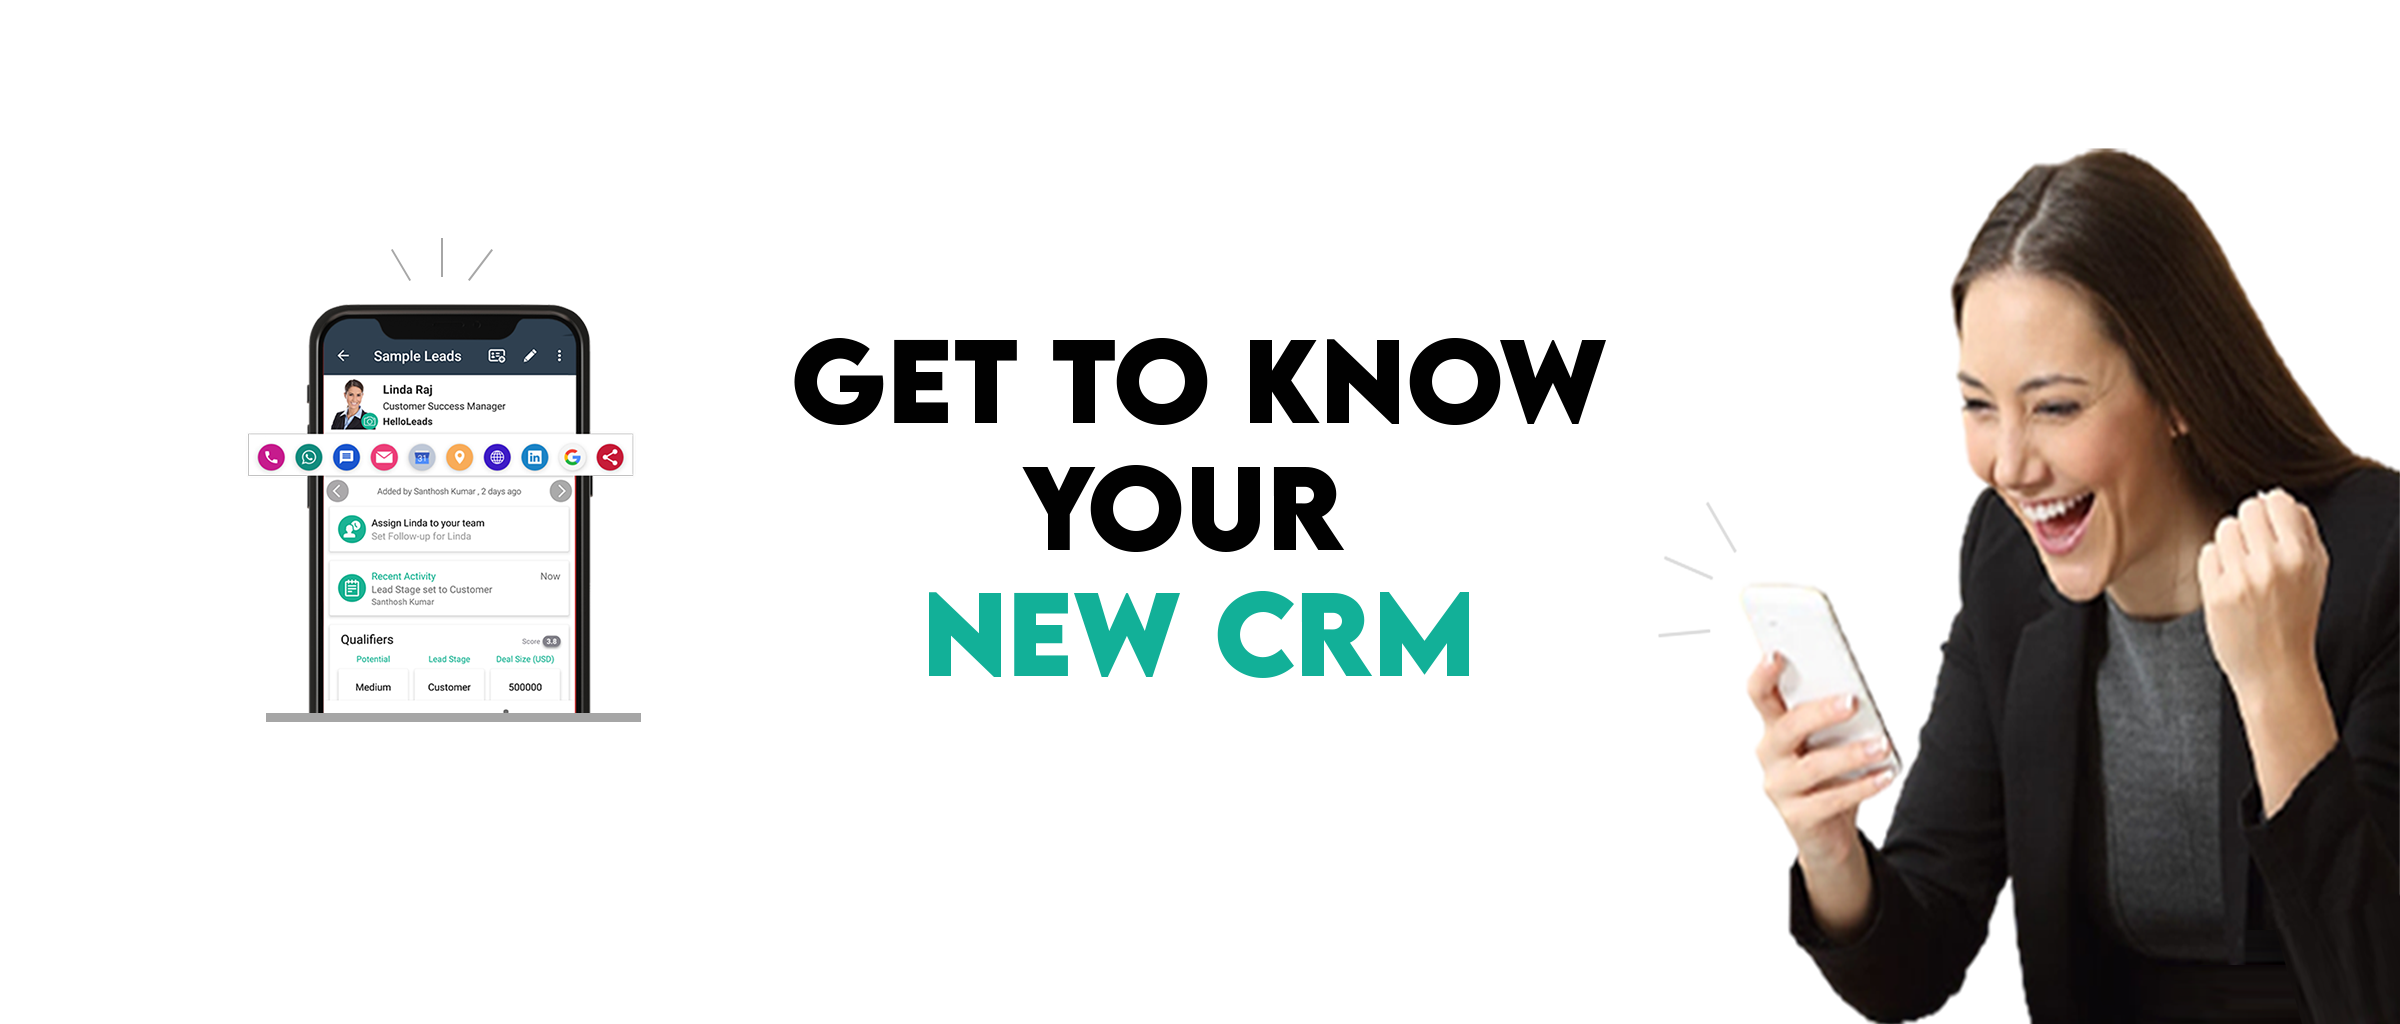 Get to know your new CRM